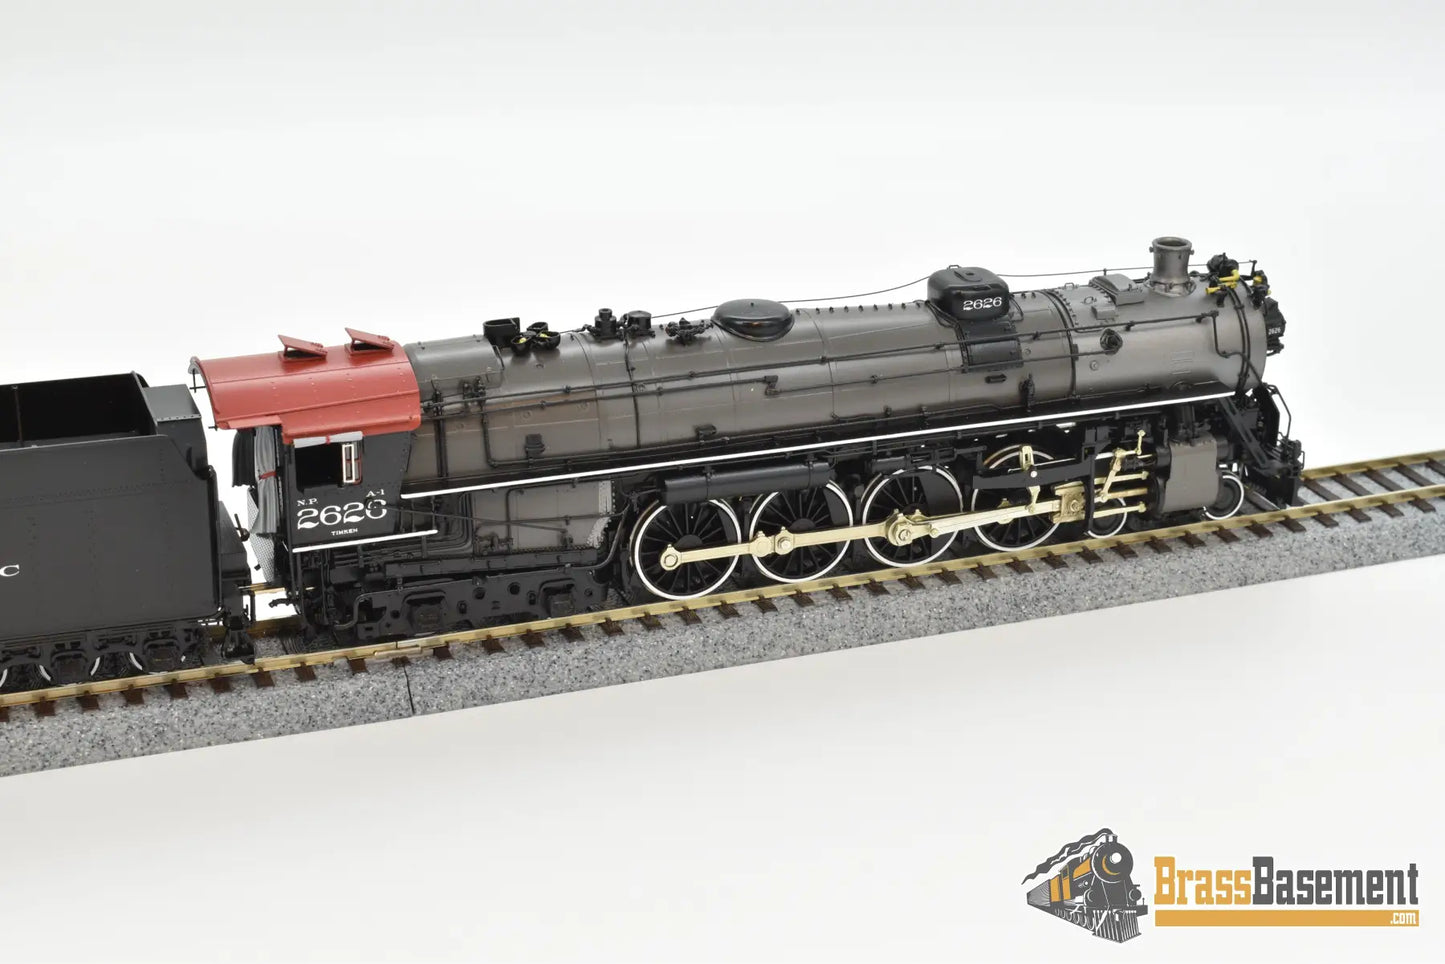 Ho Brass - W&R Northern Pacific Np 2626 A - 1 Ex - Timken Four Aces Version 2 Coal Steam